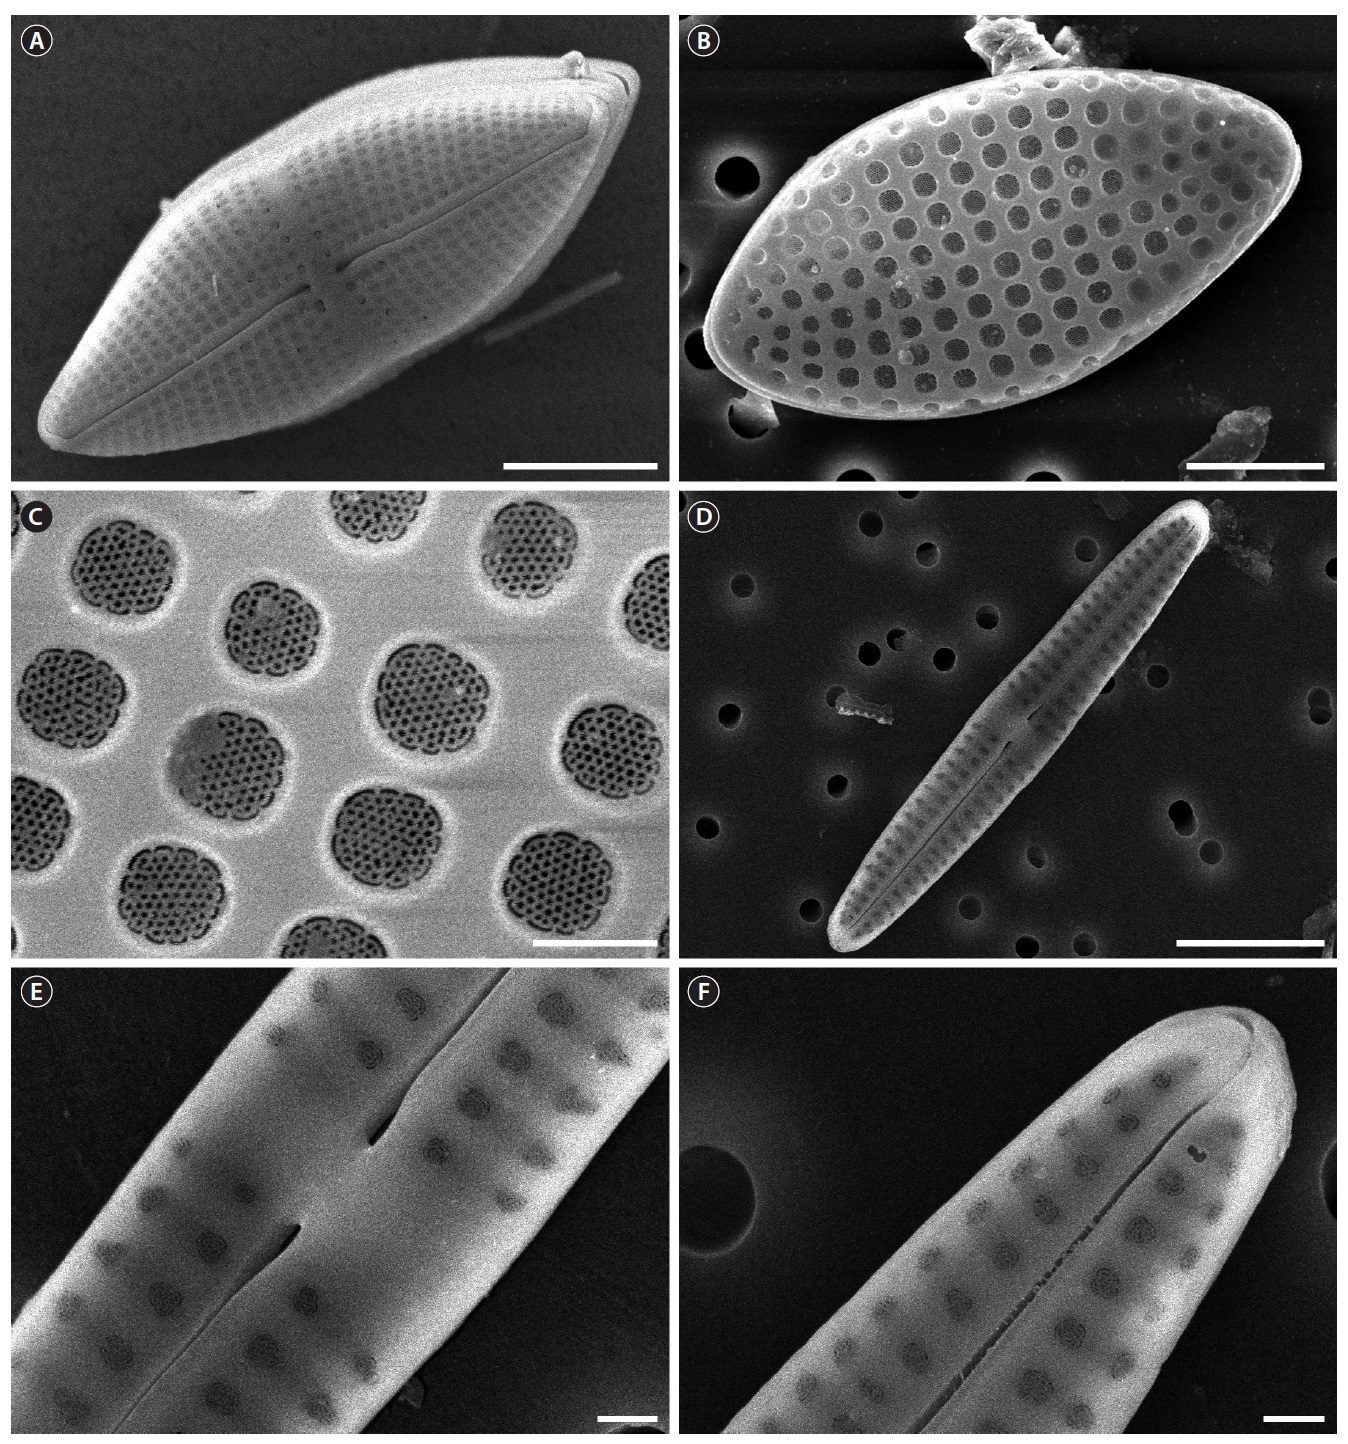 SEM microphotographs of the Achnanthes spp. (A) RV of the A. brevipes var. brevipes. (B) Cribrate areolae on the RV of the A. cocconeioides. (C) Striae
of the A. cocconeioides. (D) RV of the A. groenlandica. (E) Central area of RV of the A. groenlandica. (F) Terminal end of ARV of the A. groenlandica. Scale bars
represent: A, D, 10 μm; B, 5 μm; C, E, F, 1 μm.